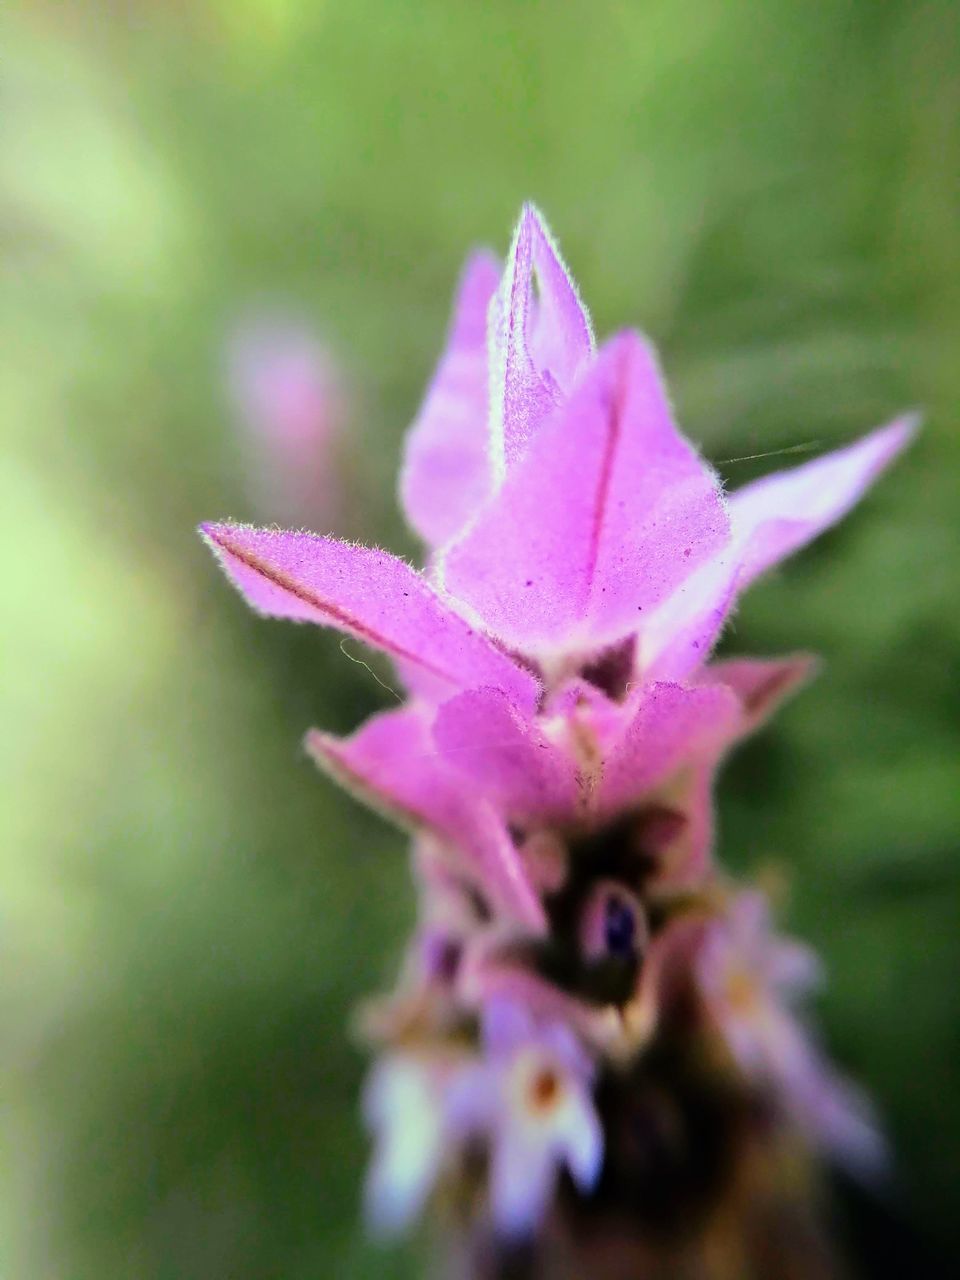 CLOSE-UP OF PINK FLOWER